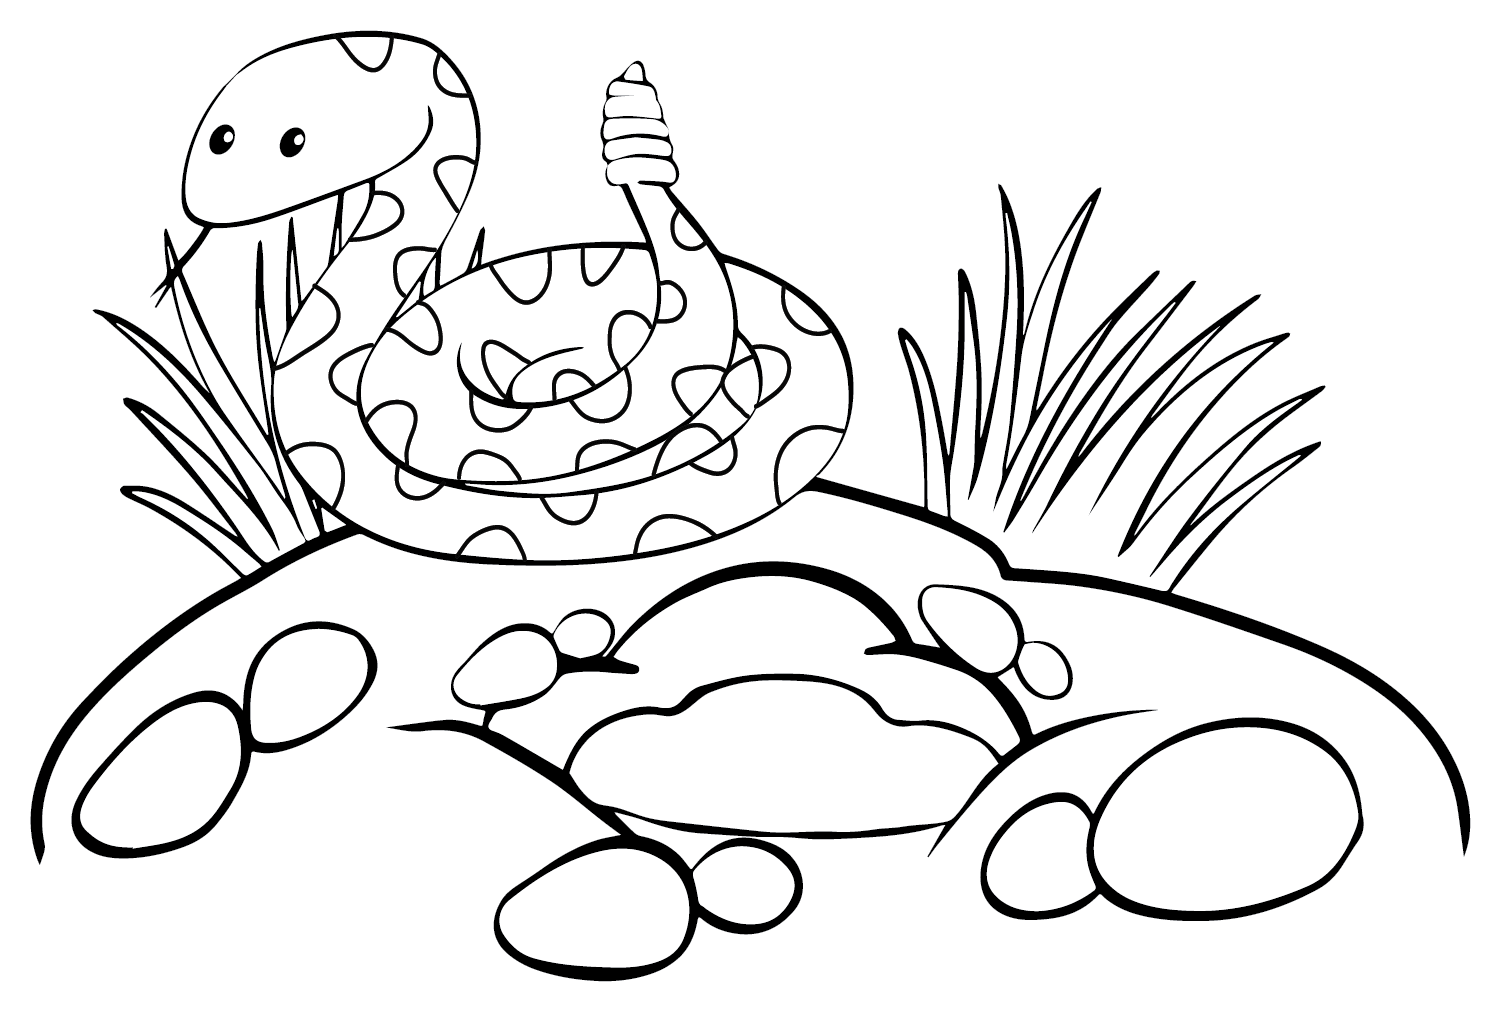 Rattlesnake Coloring Page for Adults